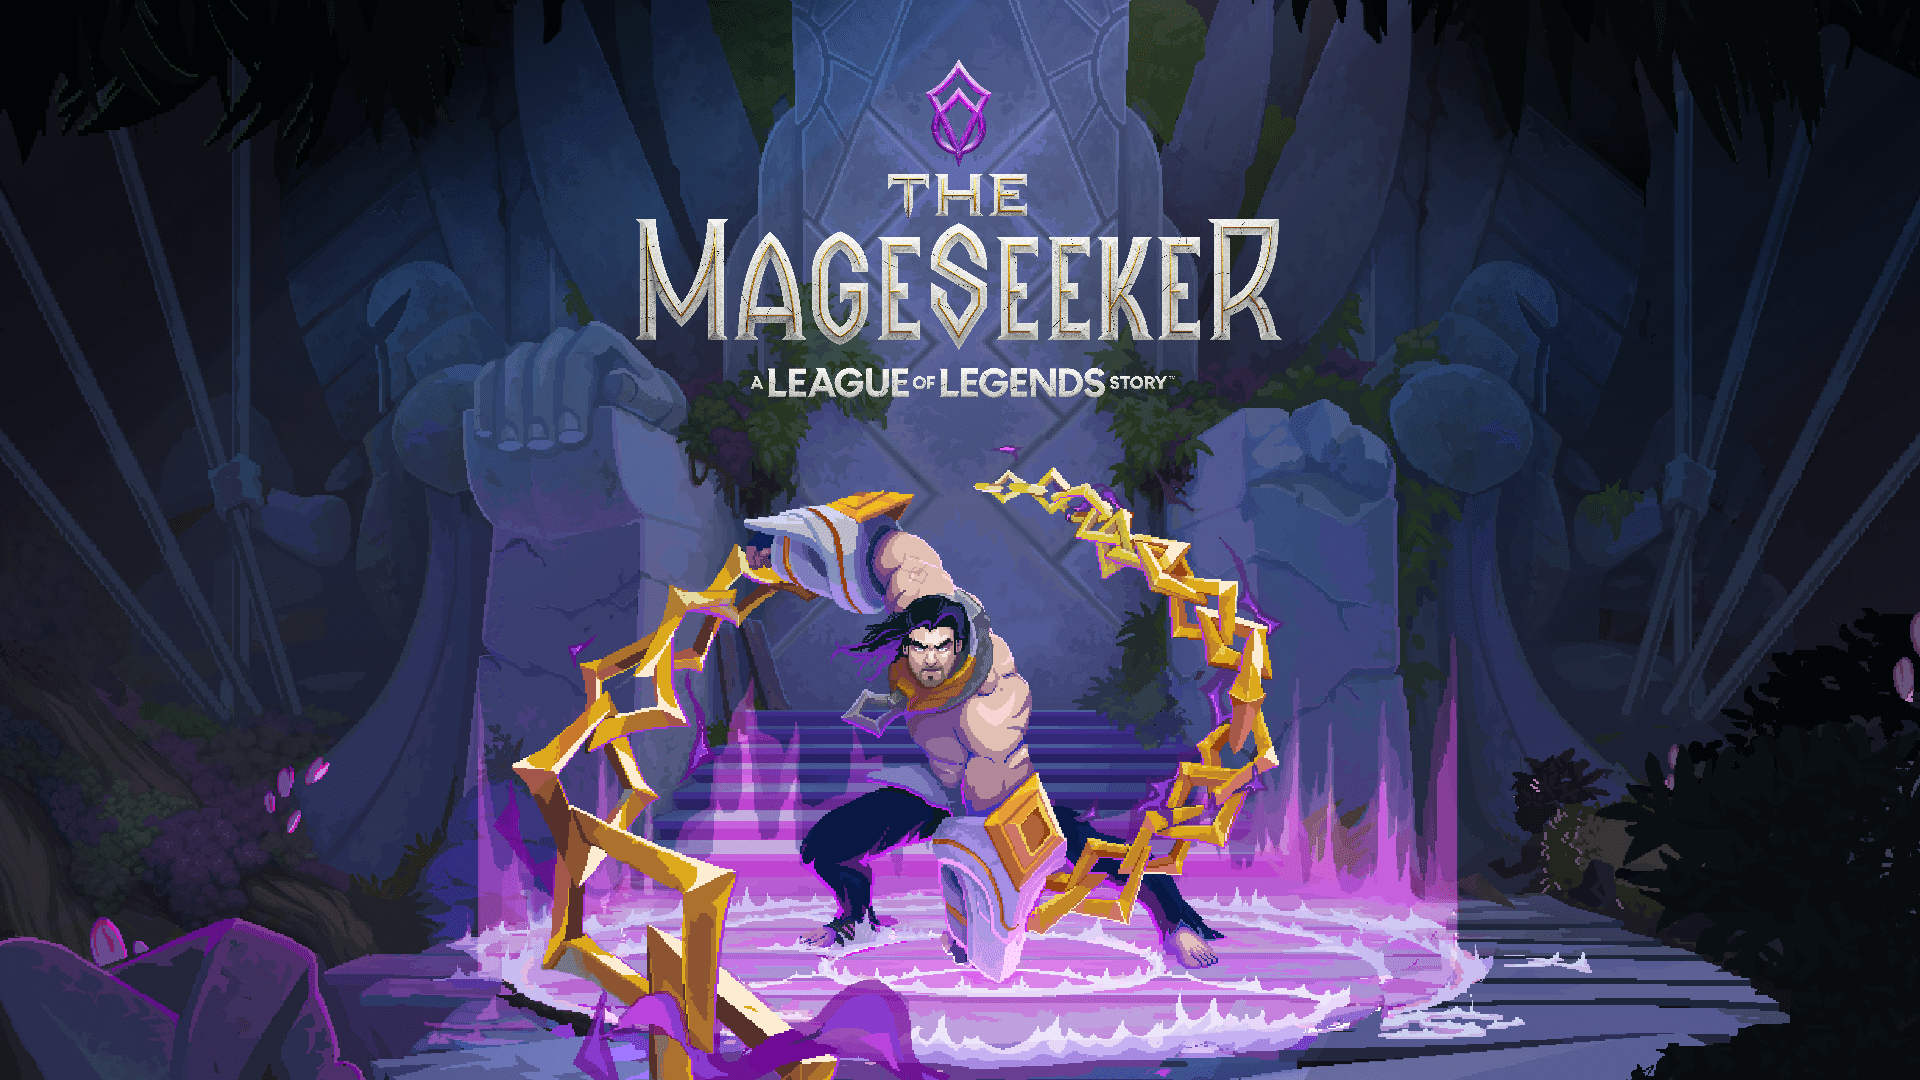 The Mageseeker : A League of Legend Story – Enfin disponible ! - GEEKNPLAY Home, News, Nintendo Switch, PC, PlayStation 4, PlayStation 5, Xbox One, Xbox Series X|S